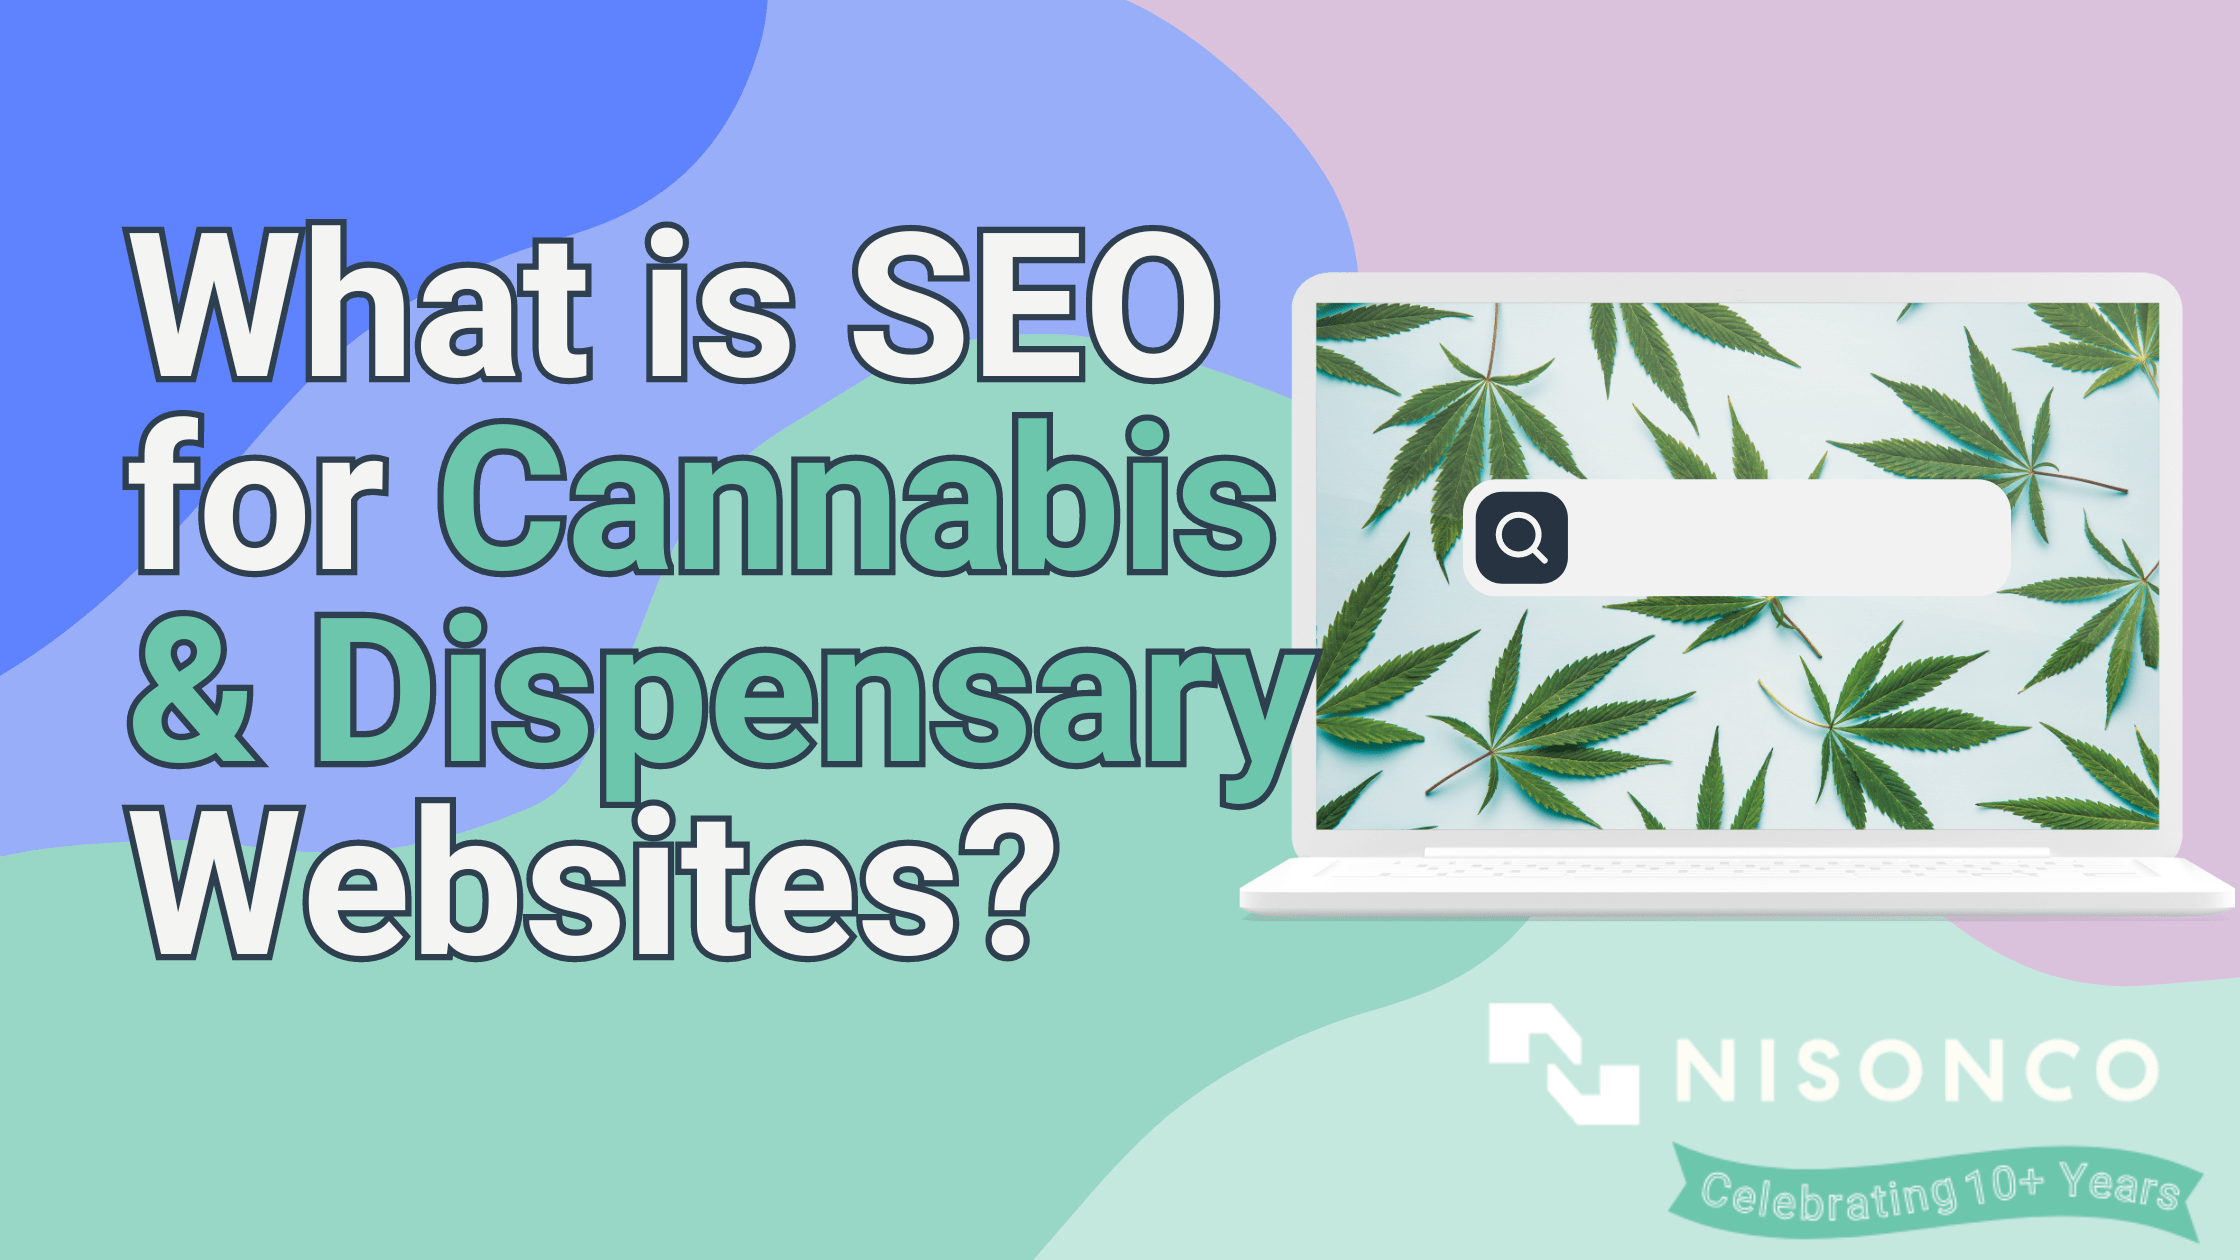 The text 'What is SEO for Cannabis & Dispensary Websites is to the left of a white laptop displaying a search engine bar over a cannabis leaf pattern